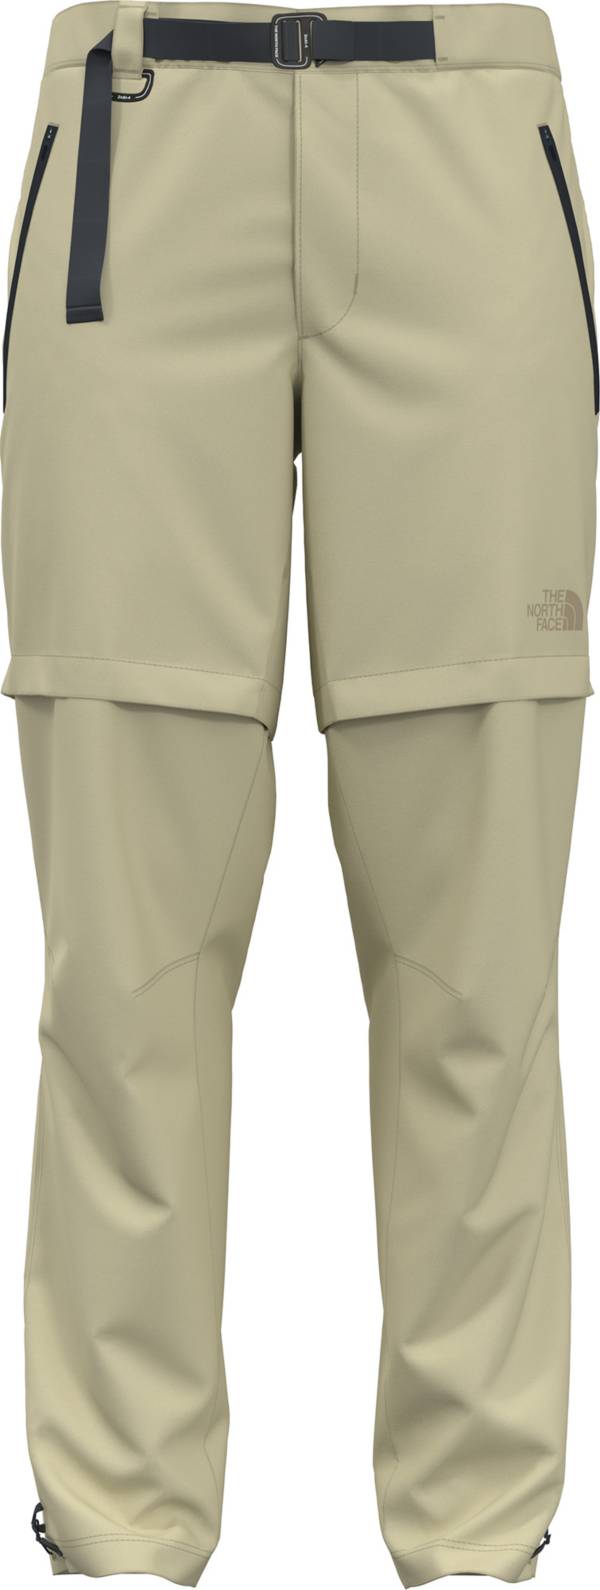 The North Face Men's Paramount Pro Convertible Pants product image